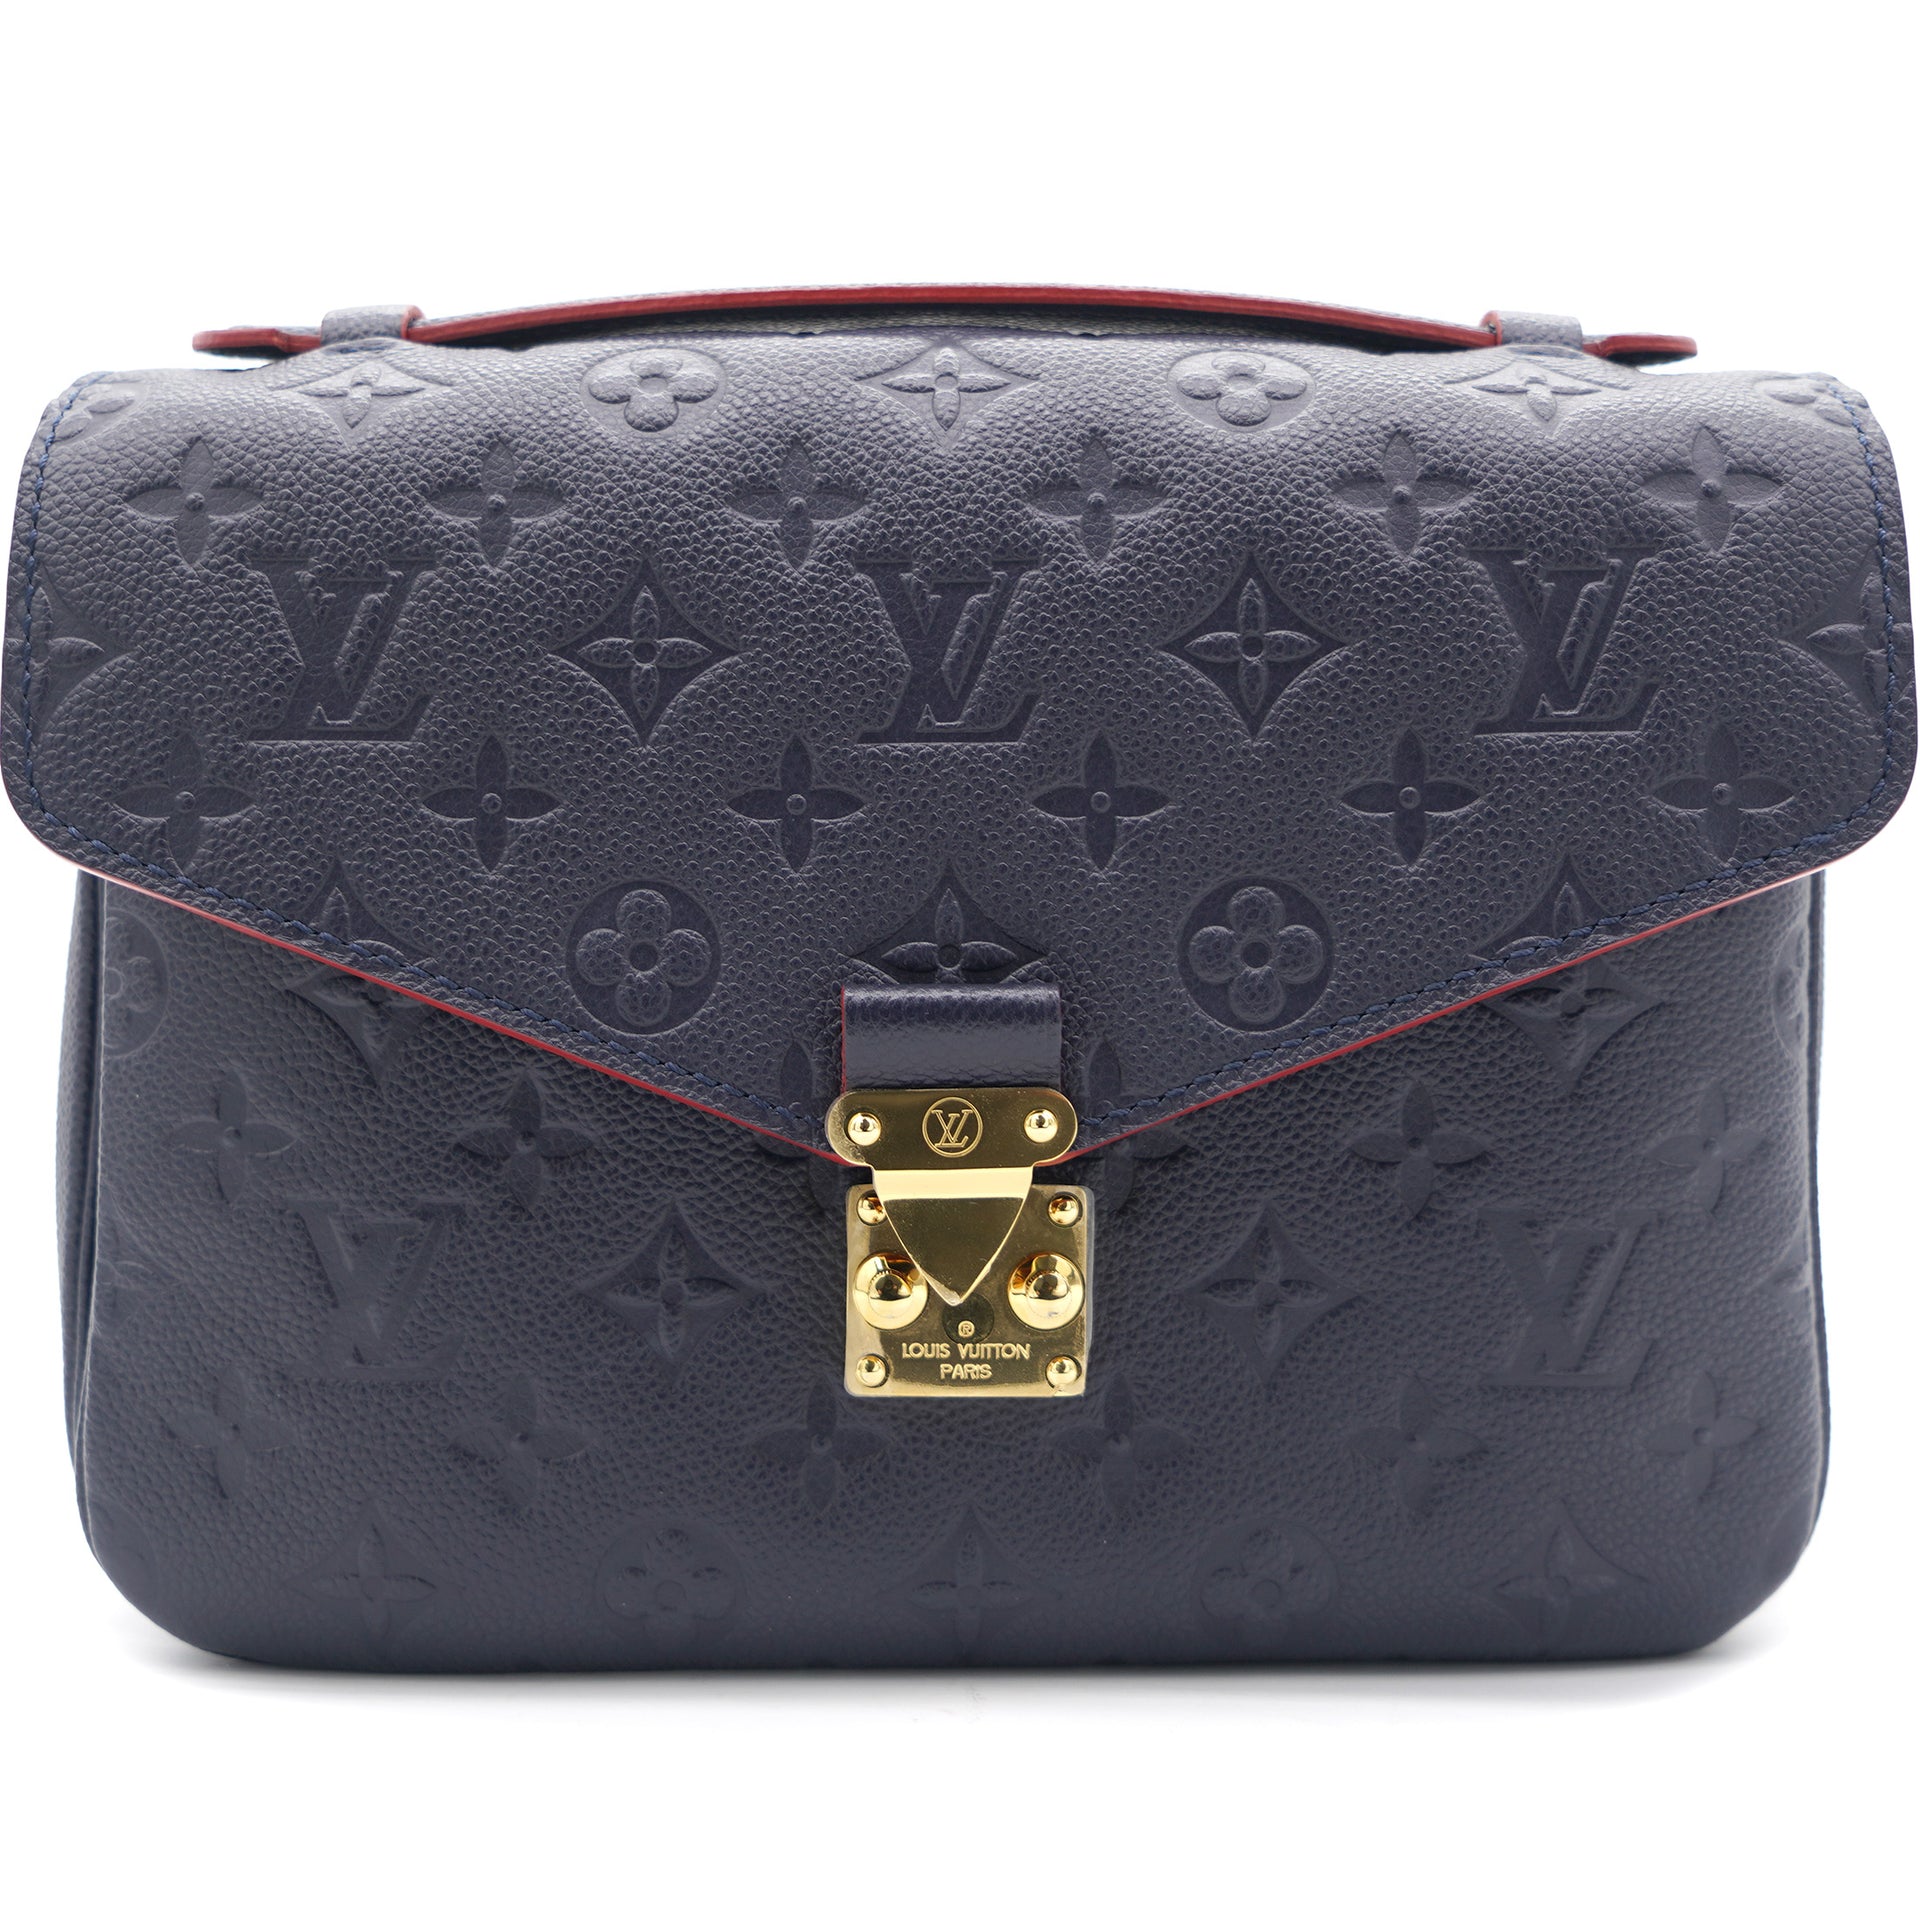 Louis Vuitton - Authenticated Metis Handbag - Leather Navy for Women, Very Good Condition